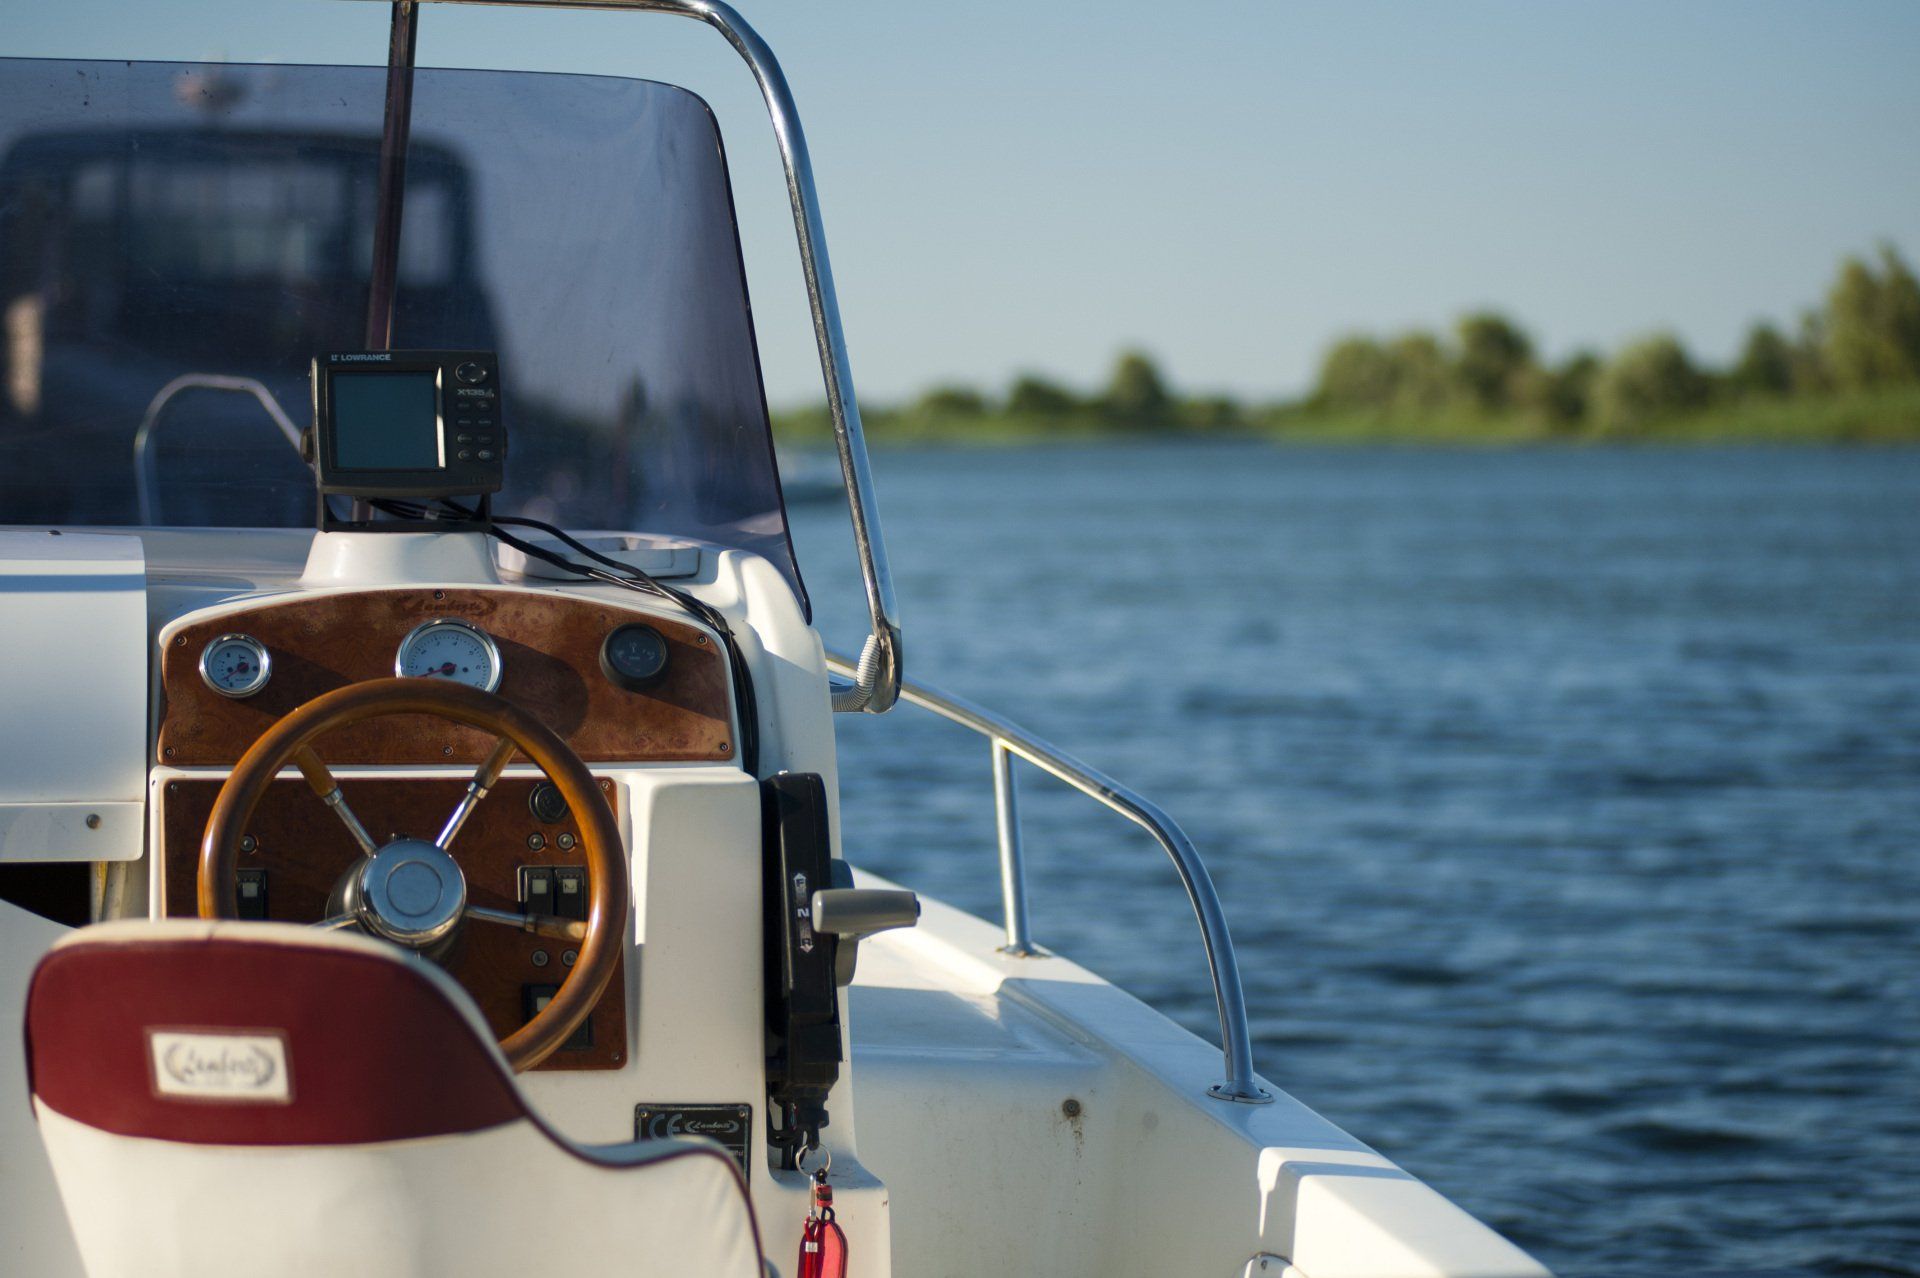 Though not legally required in Connecticut, boat insurance is a wise choice. Understand options, cov